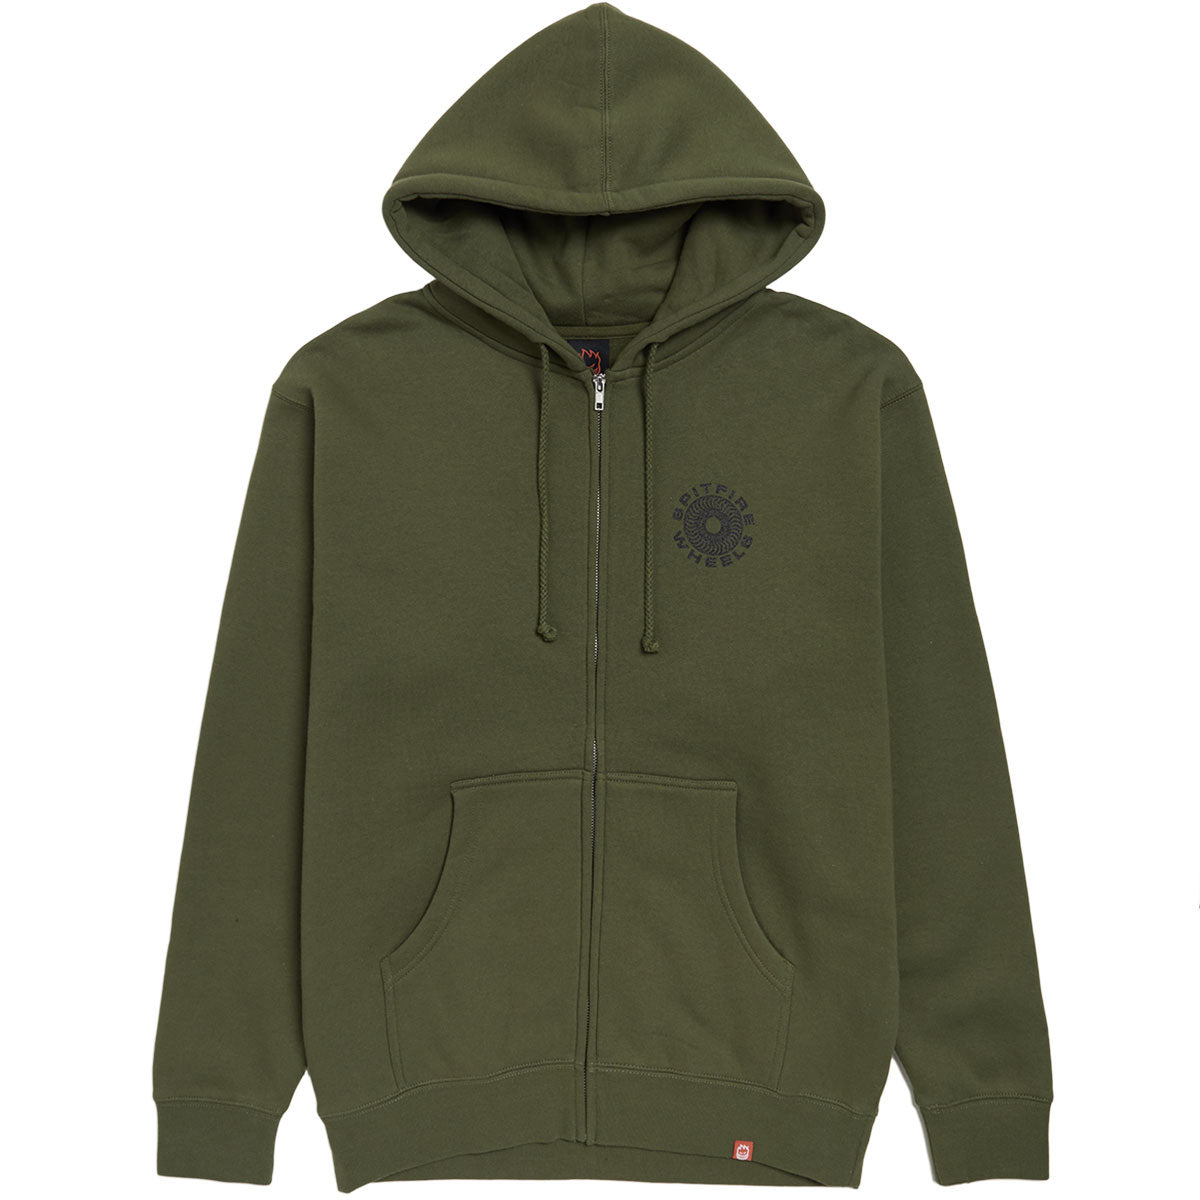 Spitfire Classic '87 Swirl Fill Zip Up Hoodie - Army/Black/White image 1